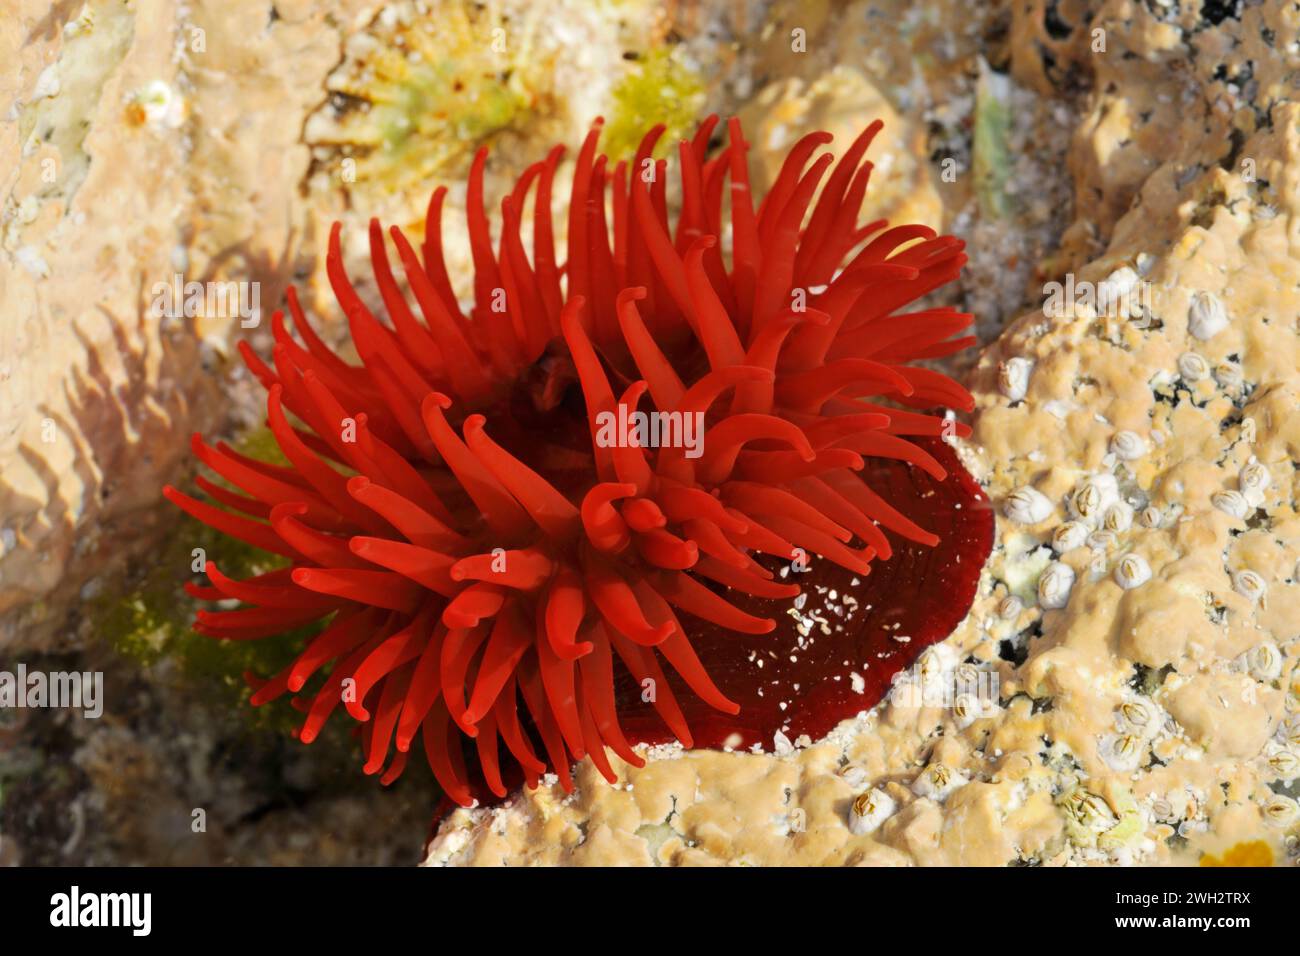 Beadlet Sea Anemone (Actinia equina) in shallow rockpool with tentacles opened out, Isle of Harris, Outer Hebrides, Scotland, May Stock Photo